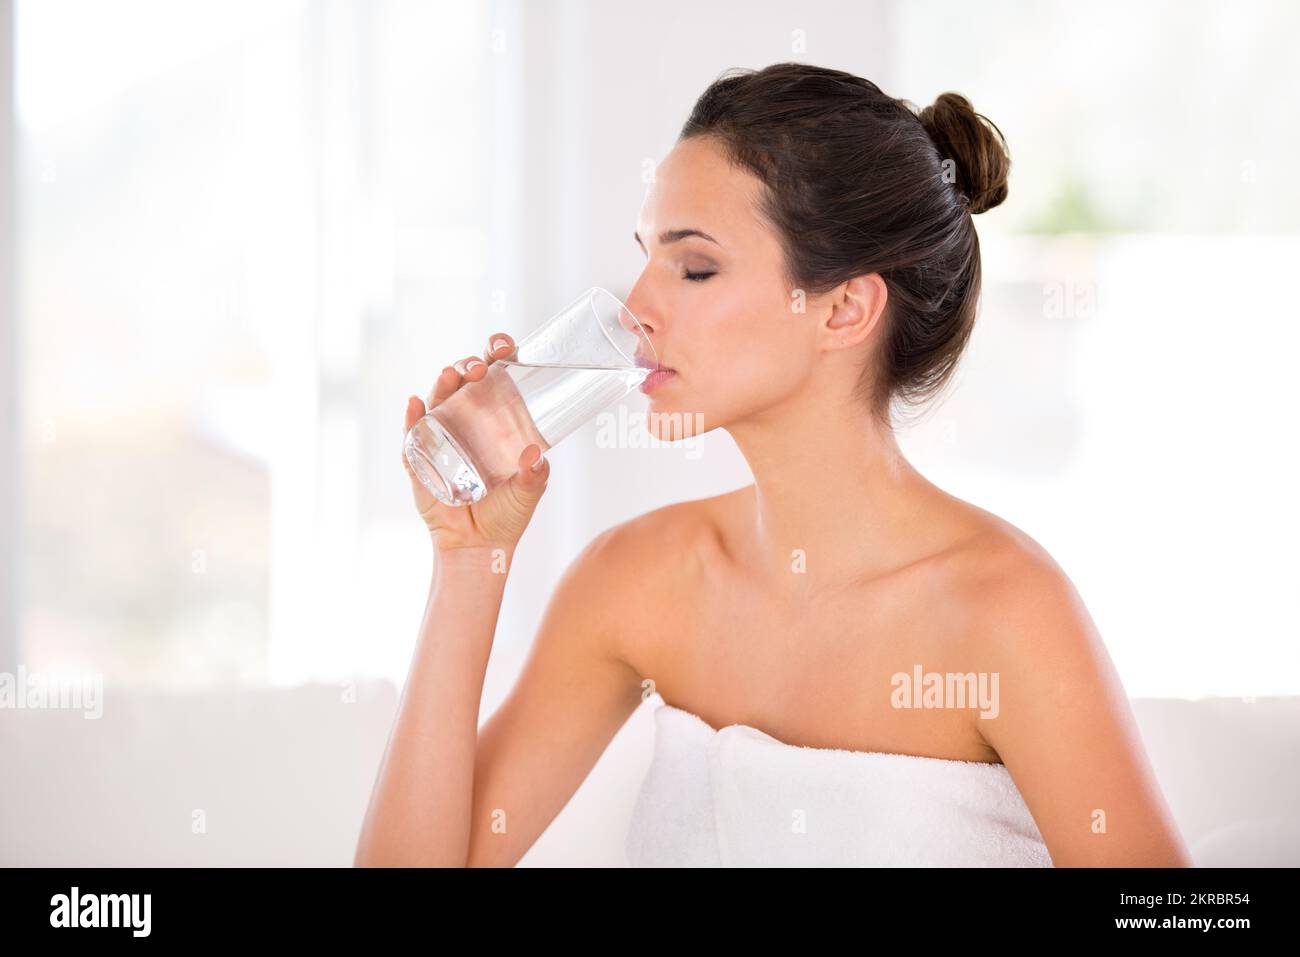 Rejuvenating her skin. Side view of a beautiful woman drinking a glass of water. Stock Photo